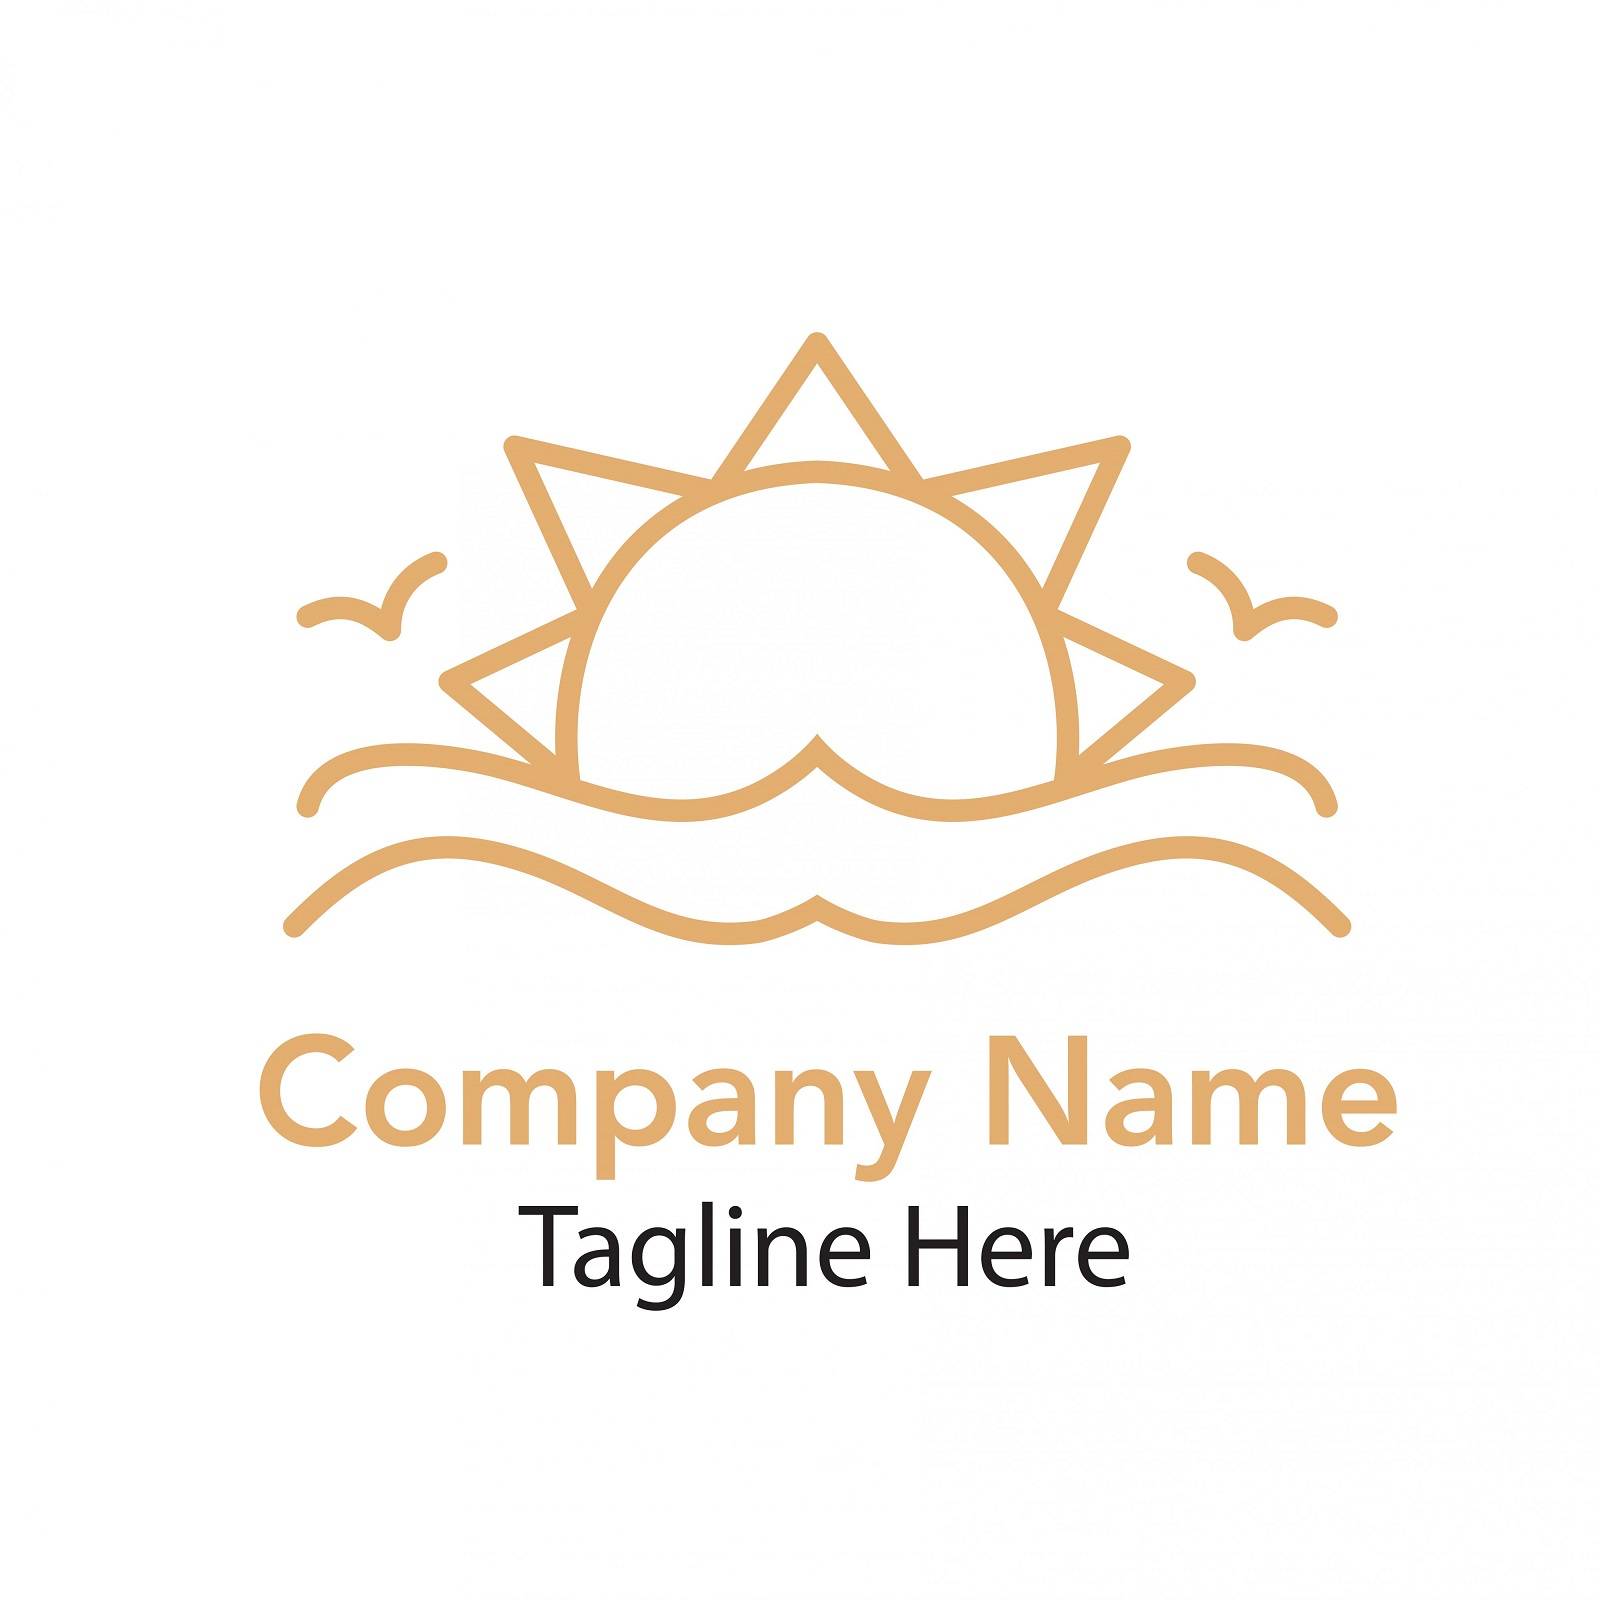 Business logo of travel agency with sun rising